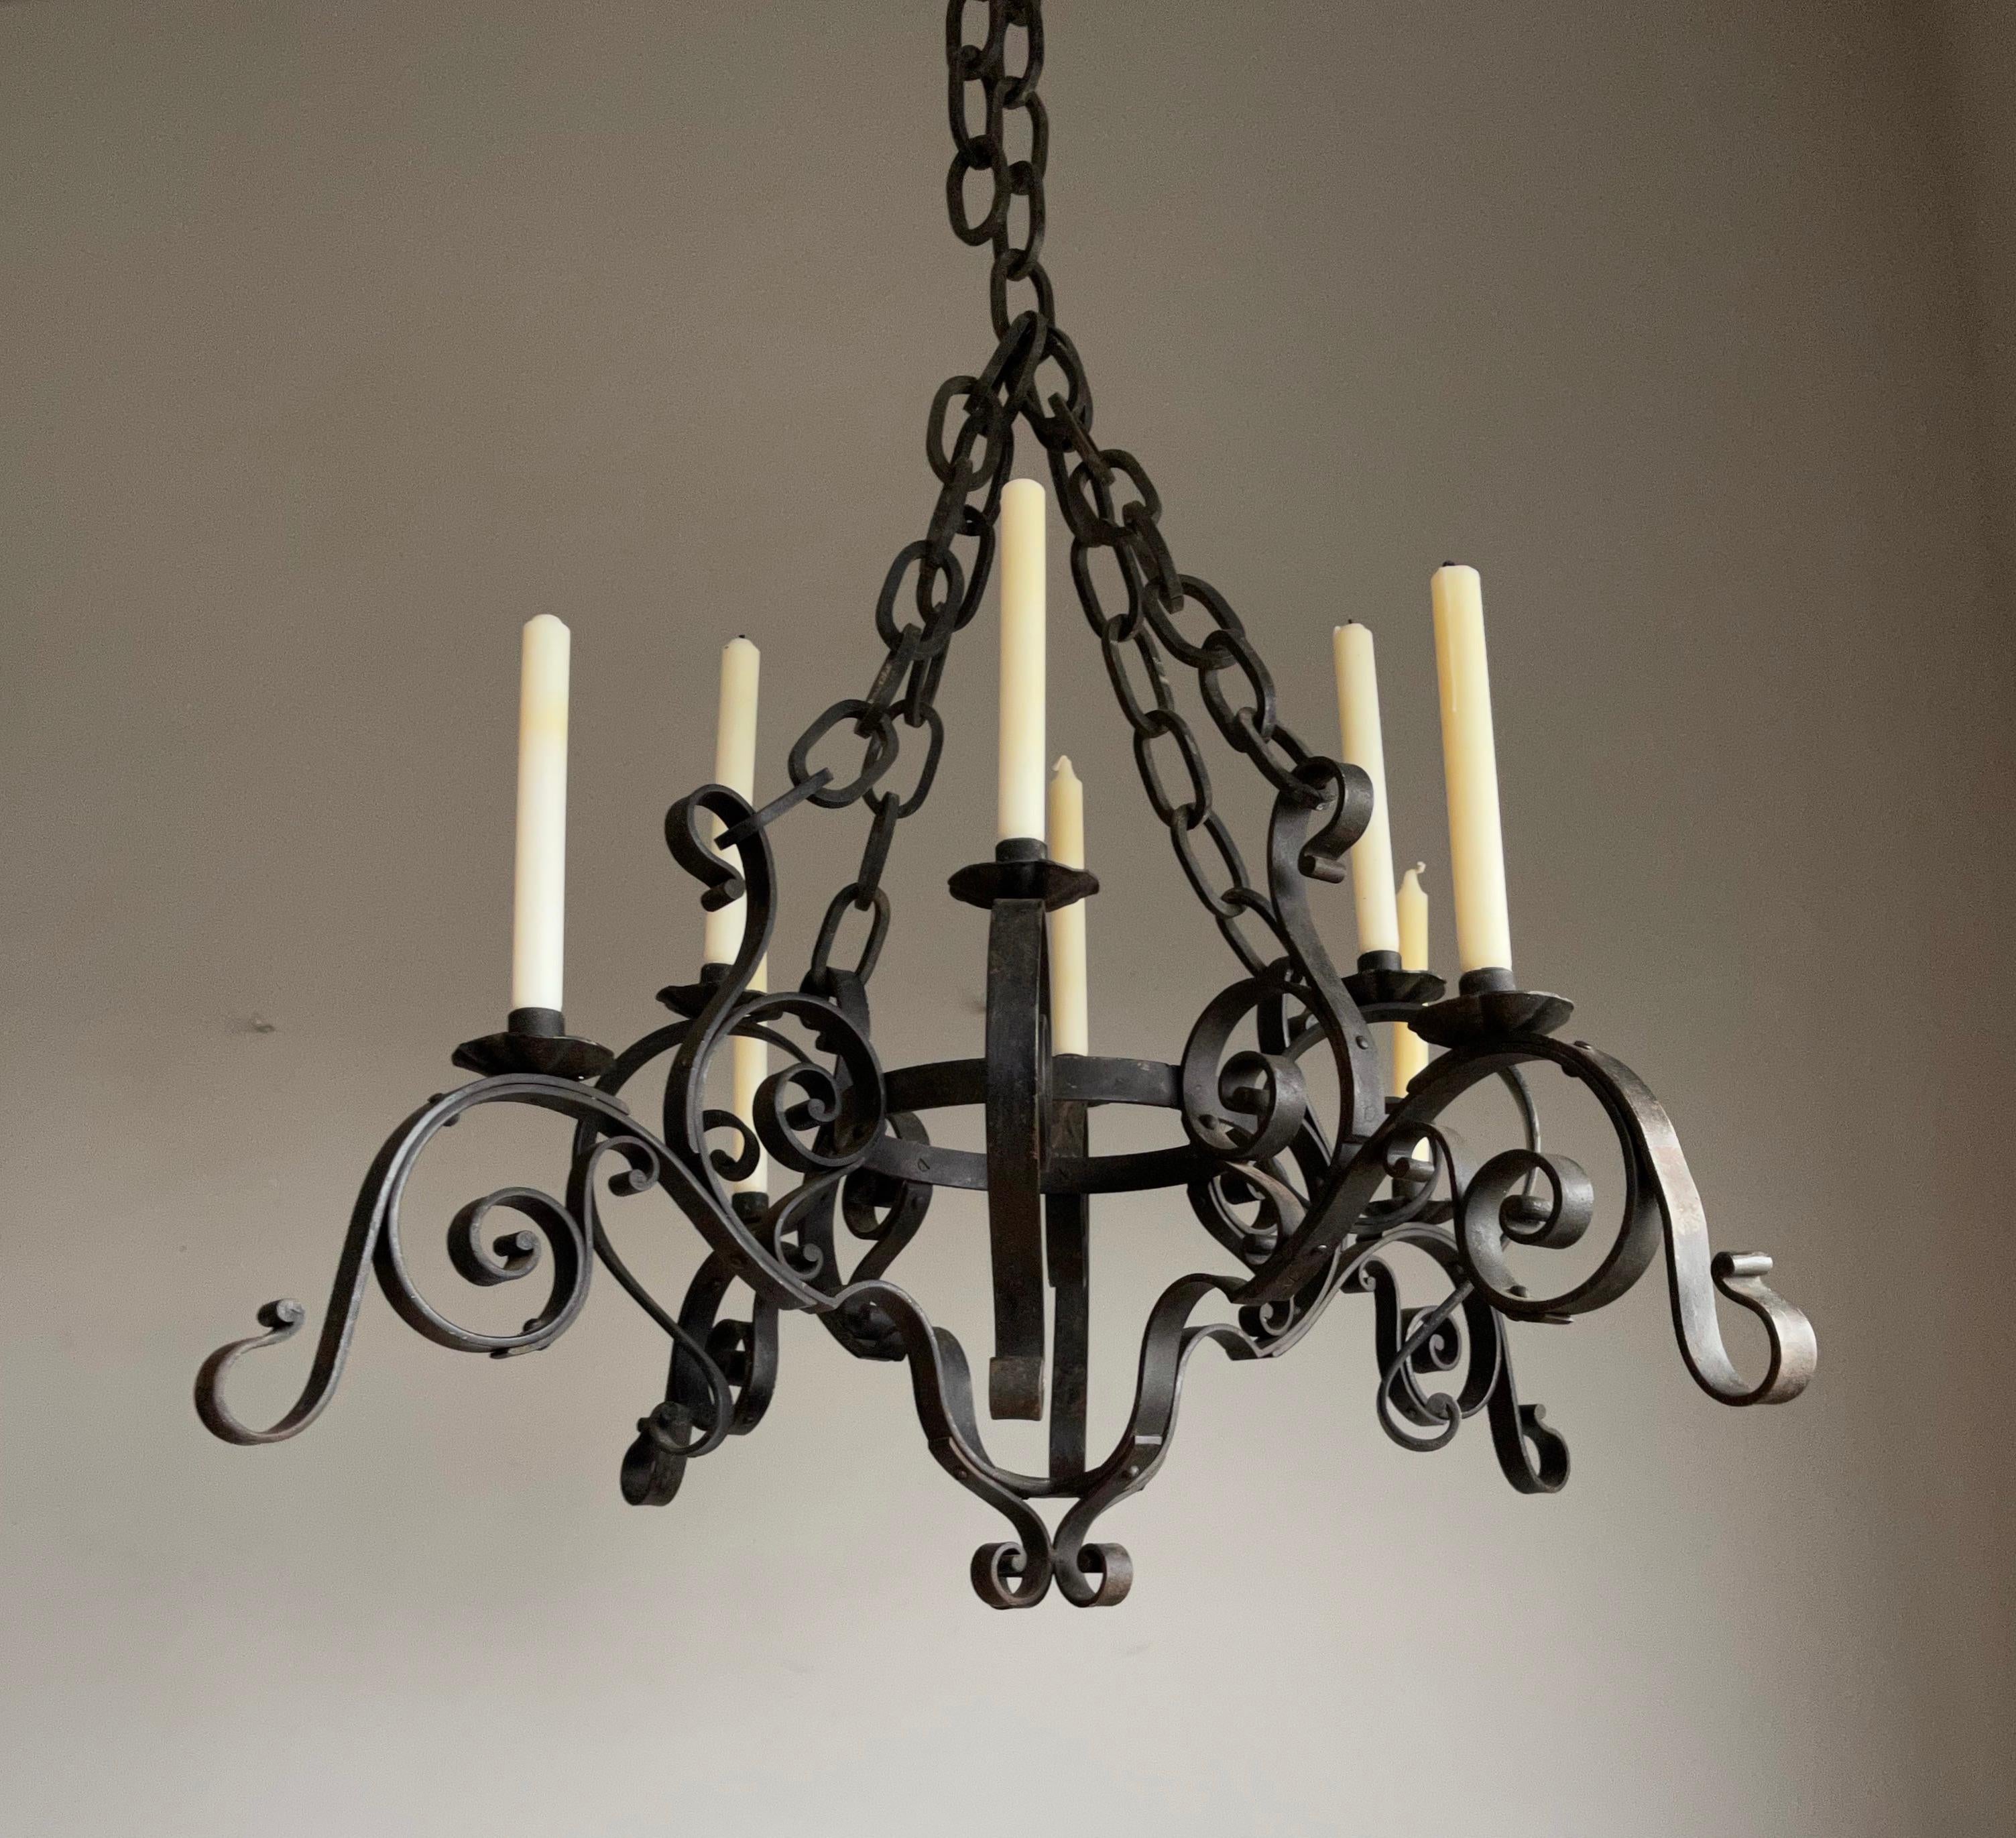 Museum quality, forged in fire, Medieval castle-design chandelier.

This excellent quality AND condition pendant is all hand-forged and its design and perfect execution lifts it above the average, to say the least. It remains a mystery to us, how on